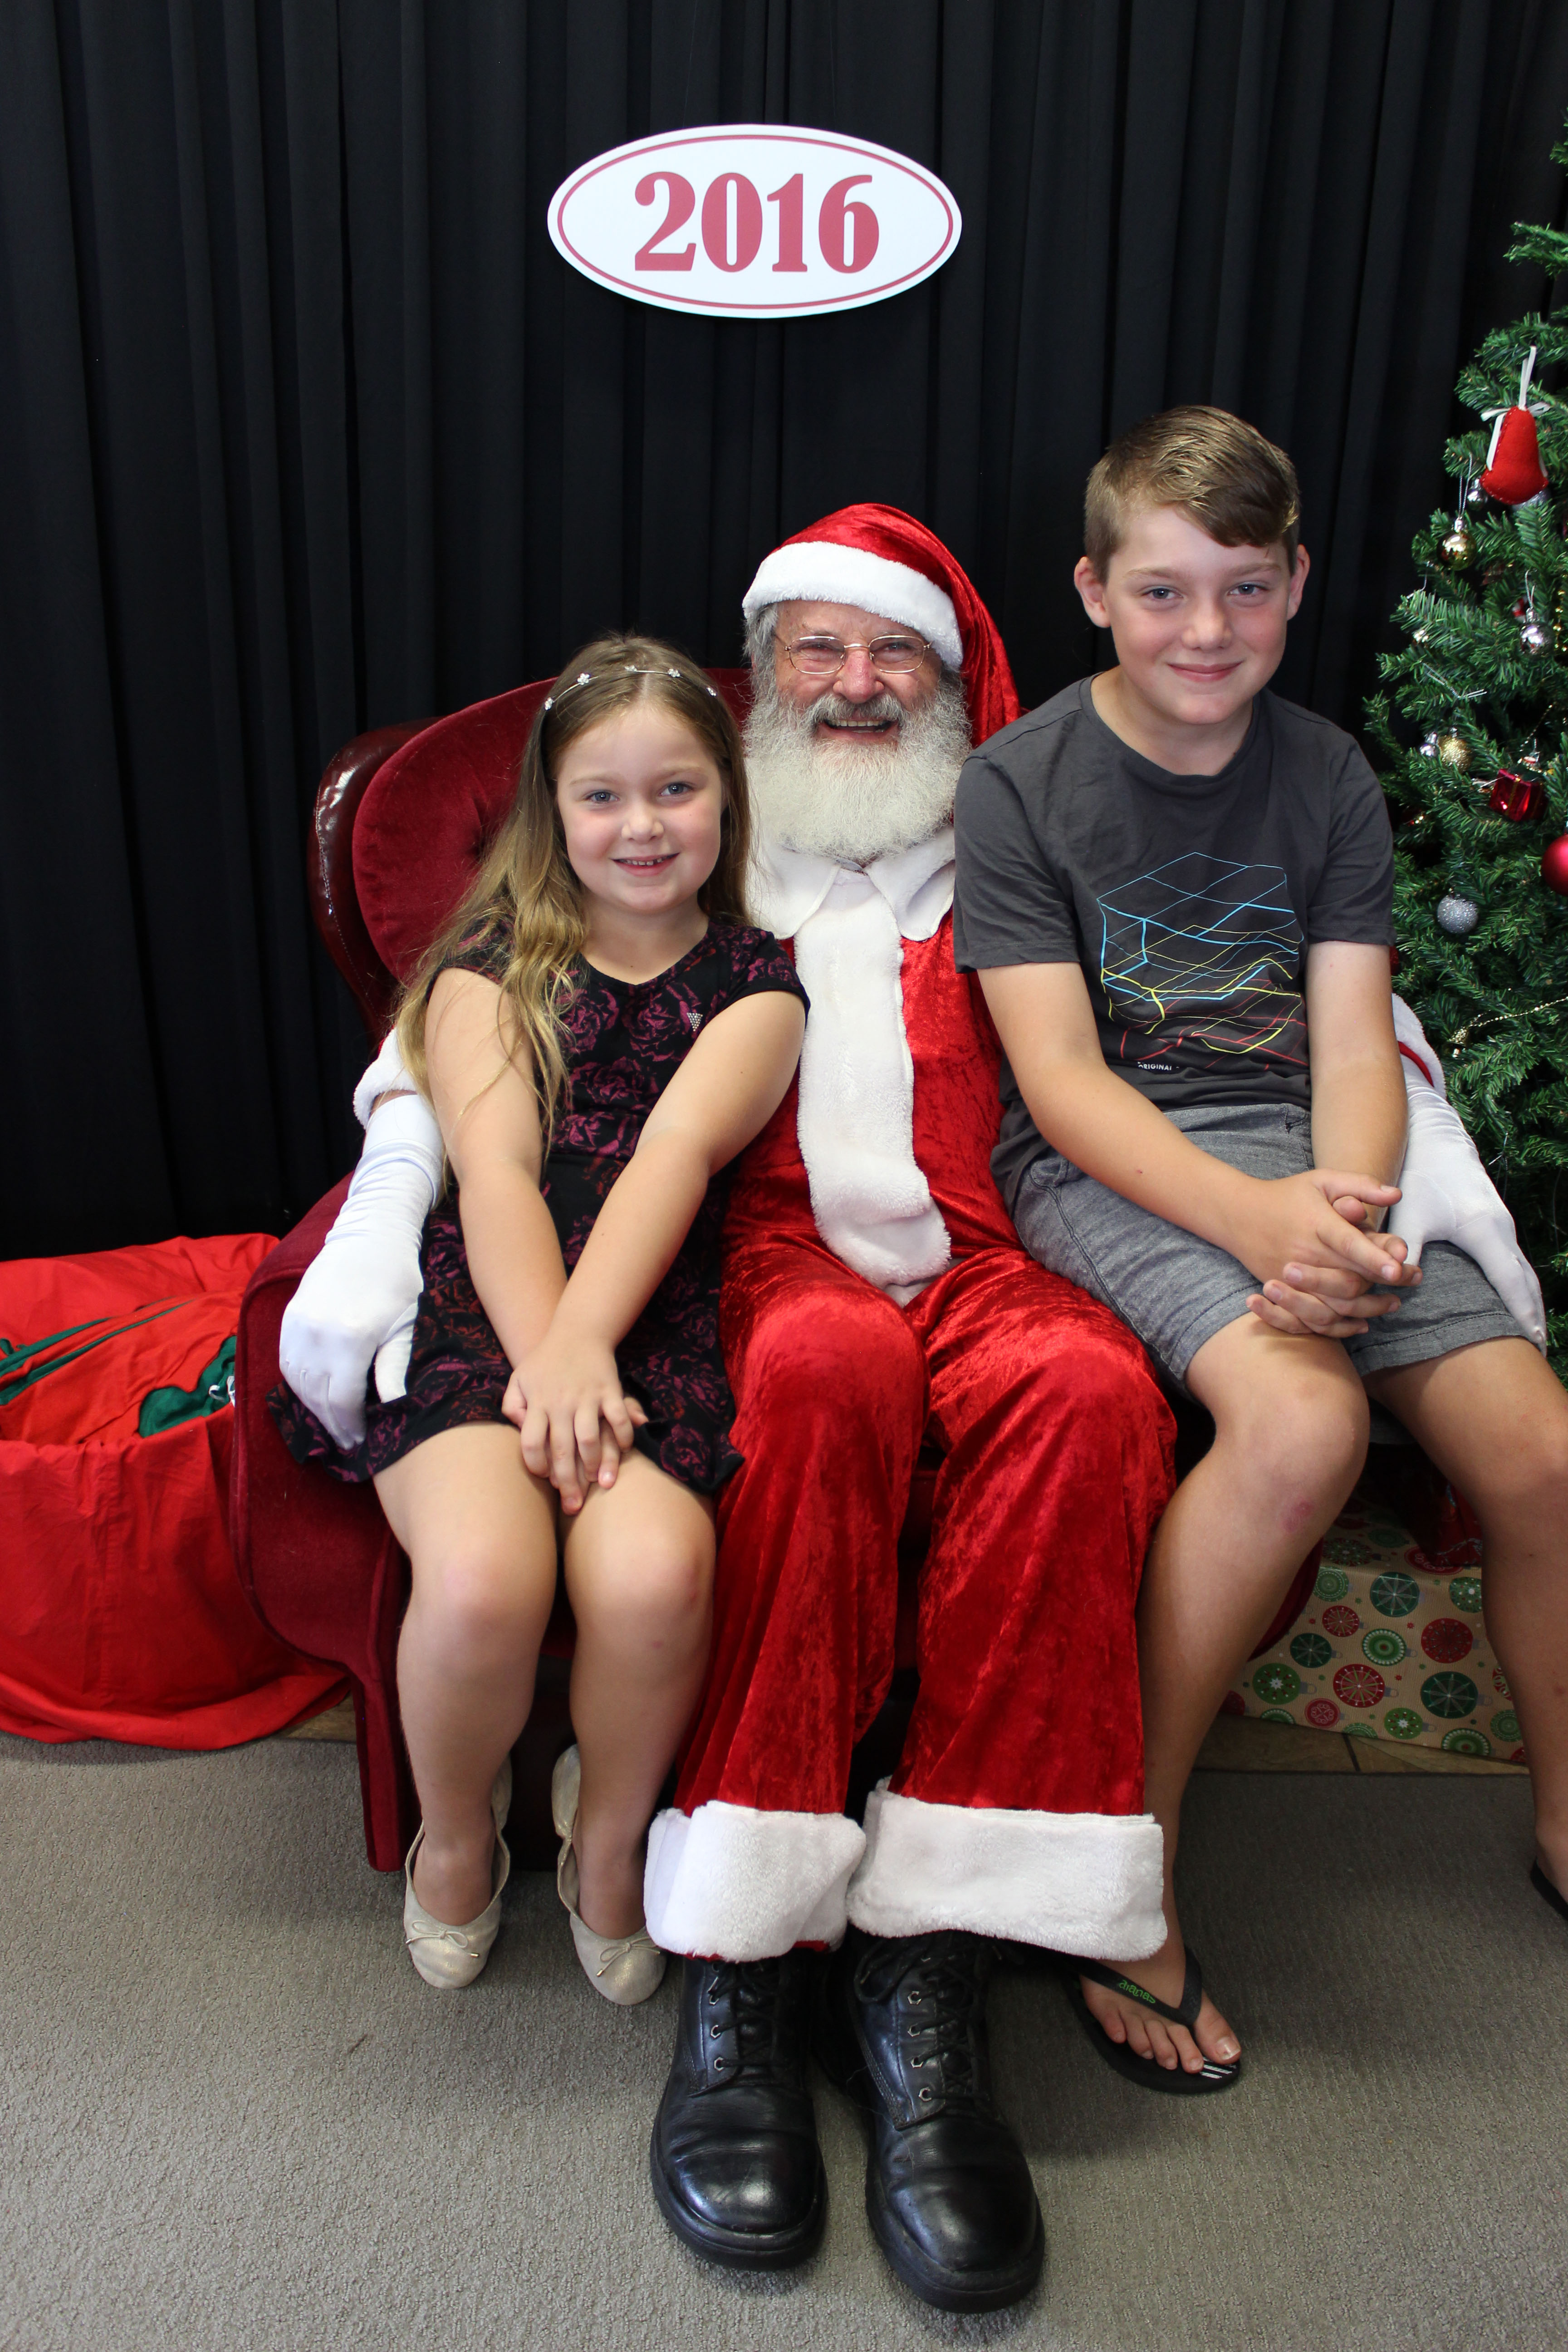 The Elzinga Family children with Santa: they look like they’ve been good this year. Photo supplied by Aaron McGowan